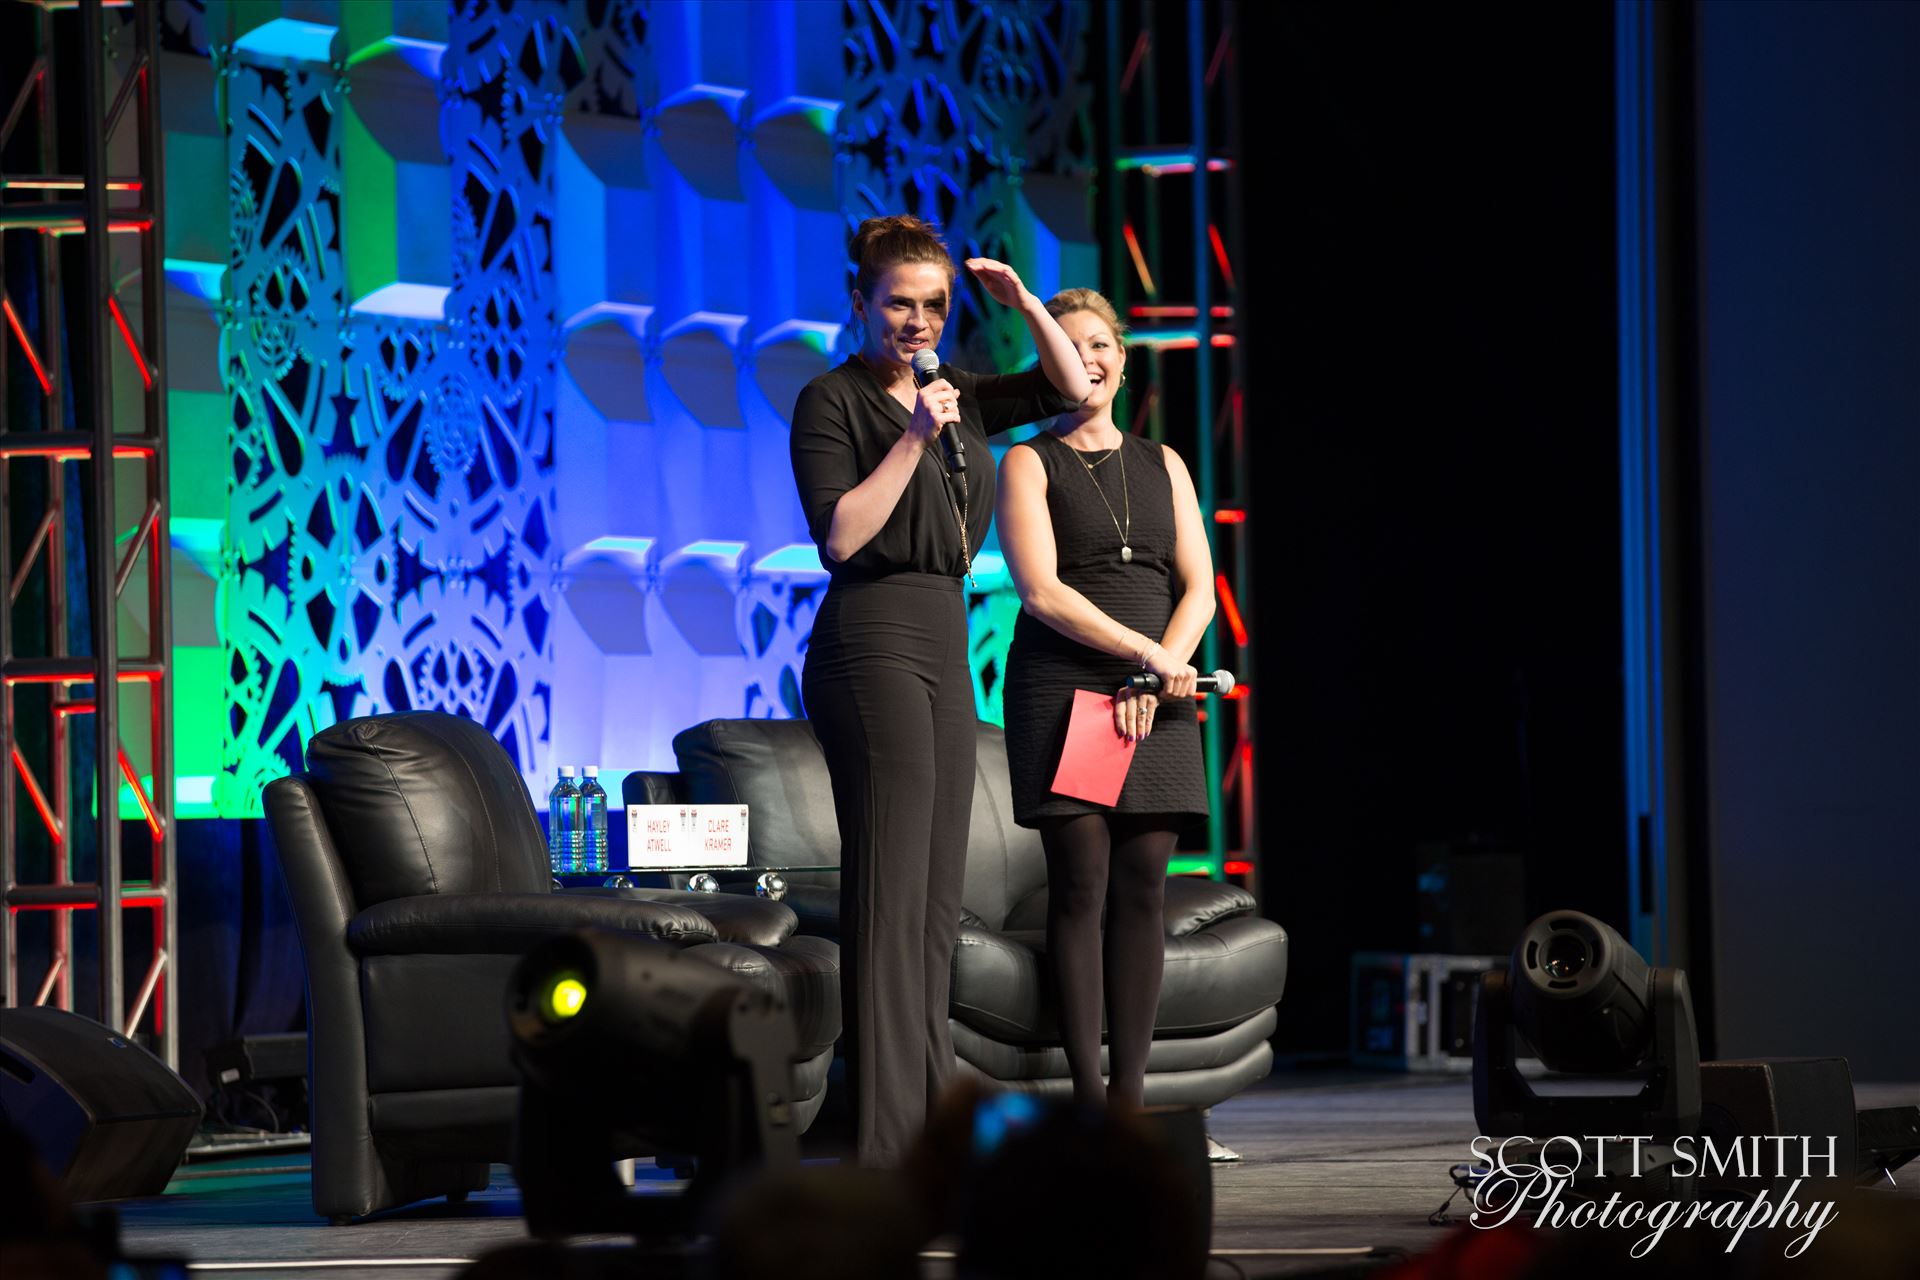 Denver Comic Con 2016 16 Denver Comic Con 2016 at the Colorado Convention Center. Clare Kramer and Haley Atwell. by Scott Smith Photos